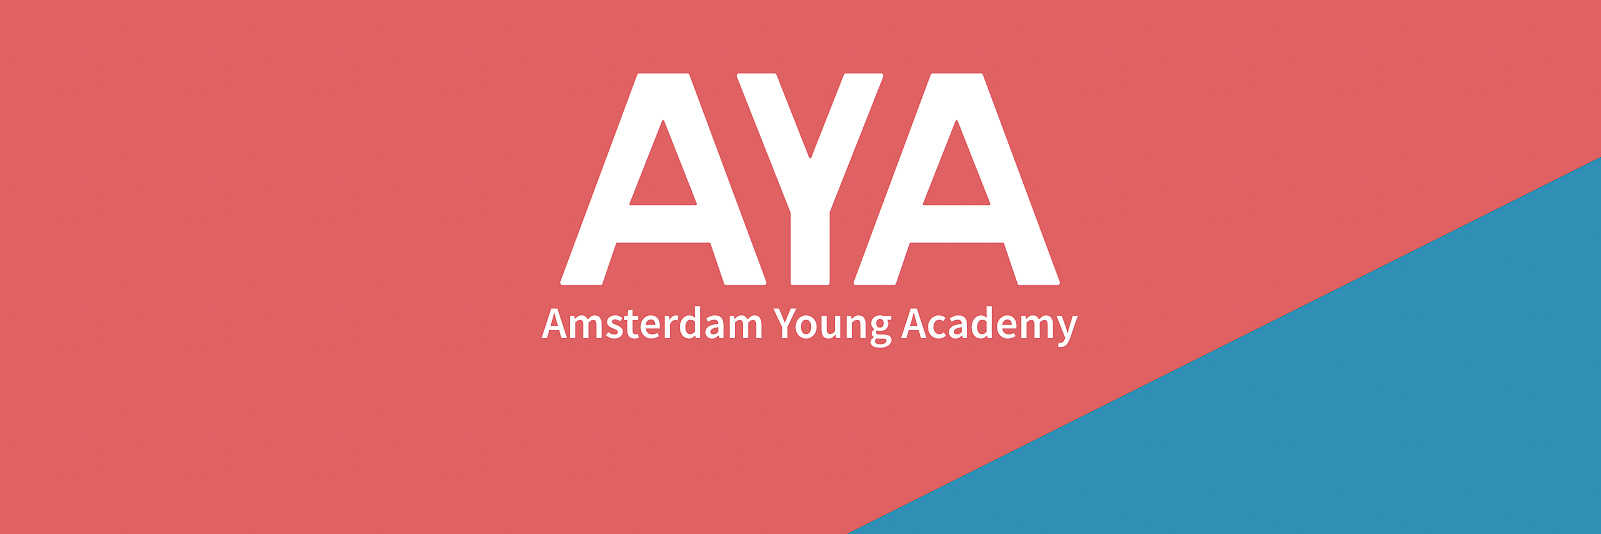 I am joing the Amsterdam Young Academic (AYA)